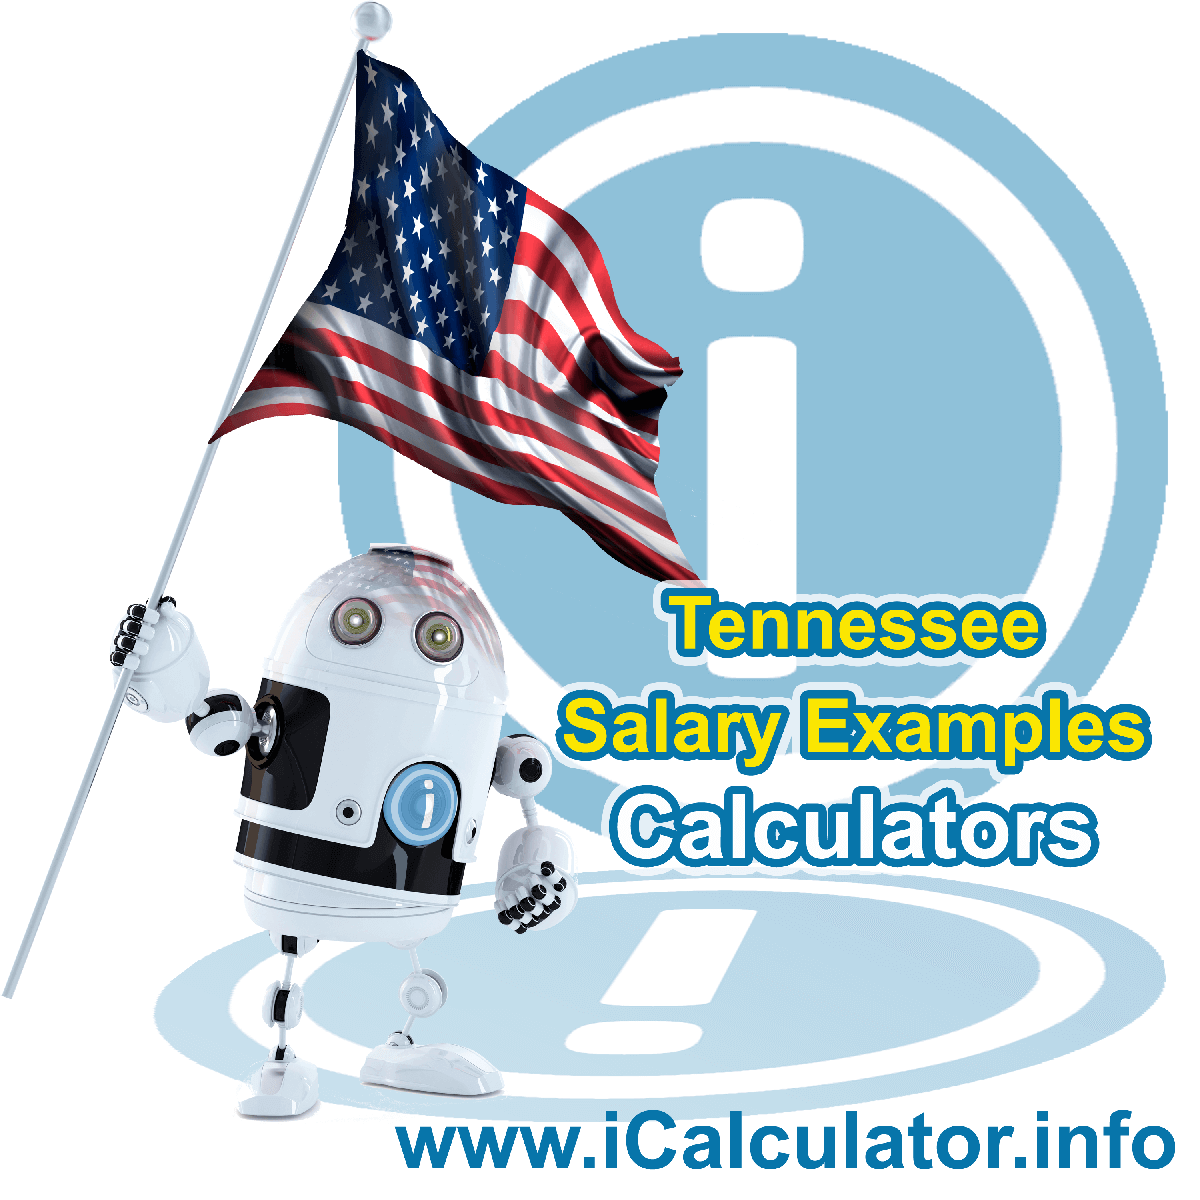 Tennessee Salary Example for $290,000.00 in 2022 | iCalculator™ | $290,000.00 salary example for employee and employer paying Tennessee State tincome taxes. Detailed salary after tax calculation including Tennessee State Tax, Federal State Tax, Medicare Deductions, Social Security, Capital Gains and other income tax and salary deductions complete with supporting Tennessee state tax tables 